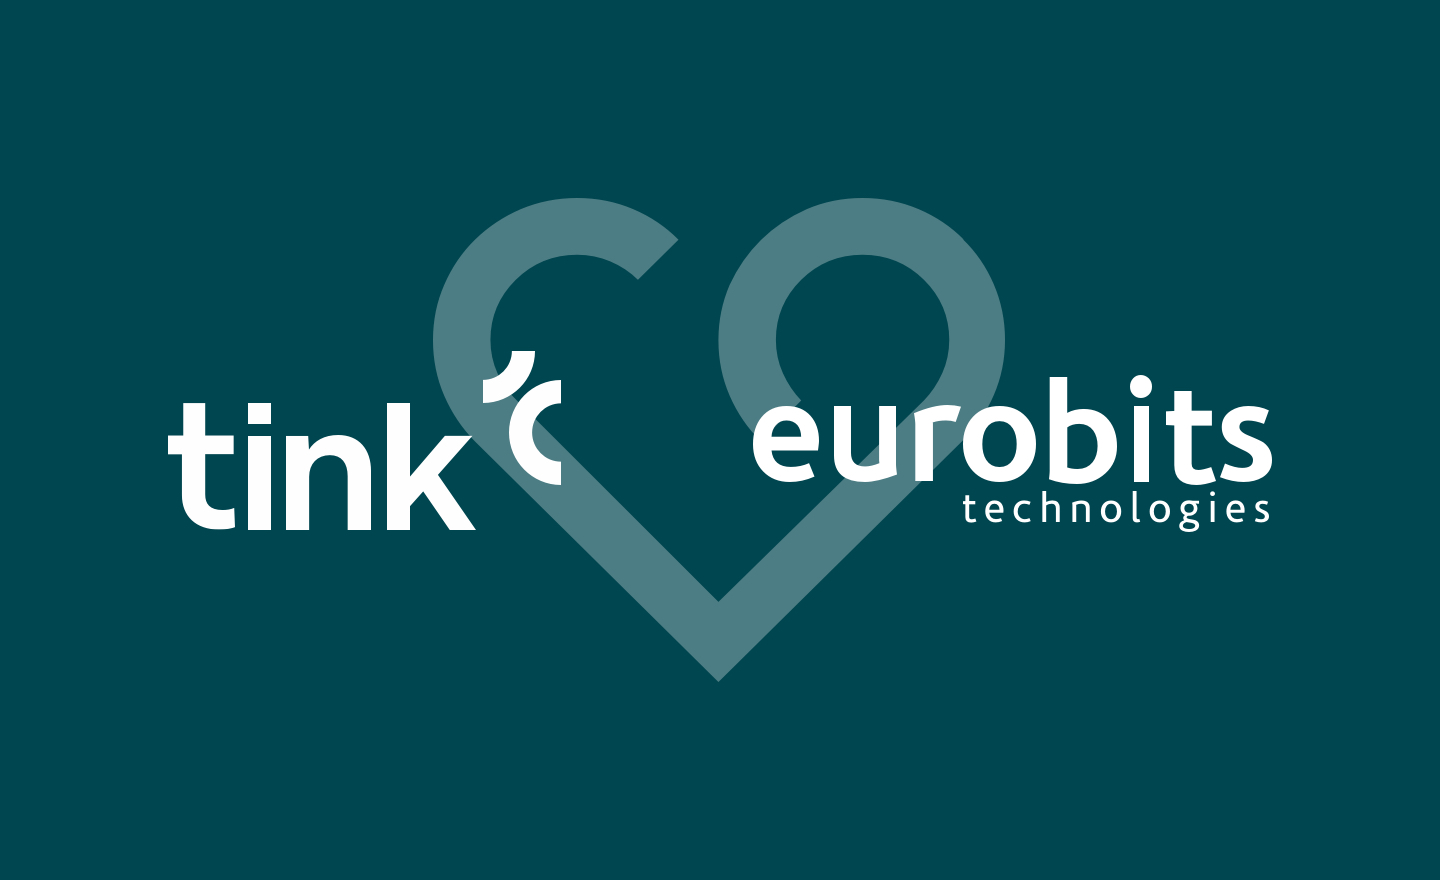 Tink and Eurobits become one